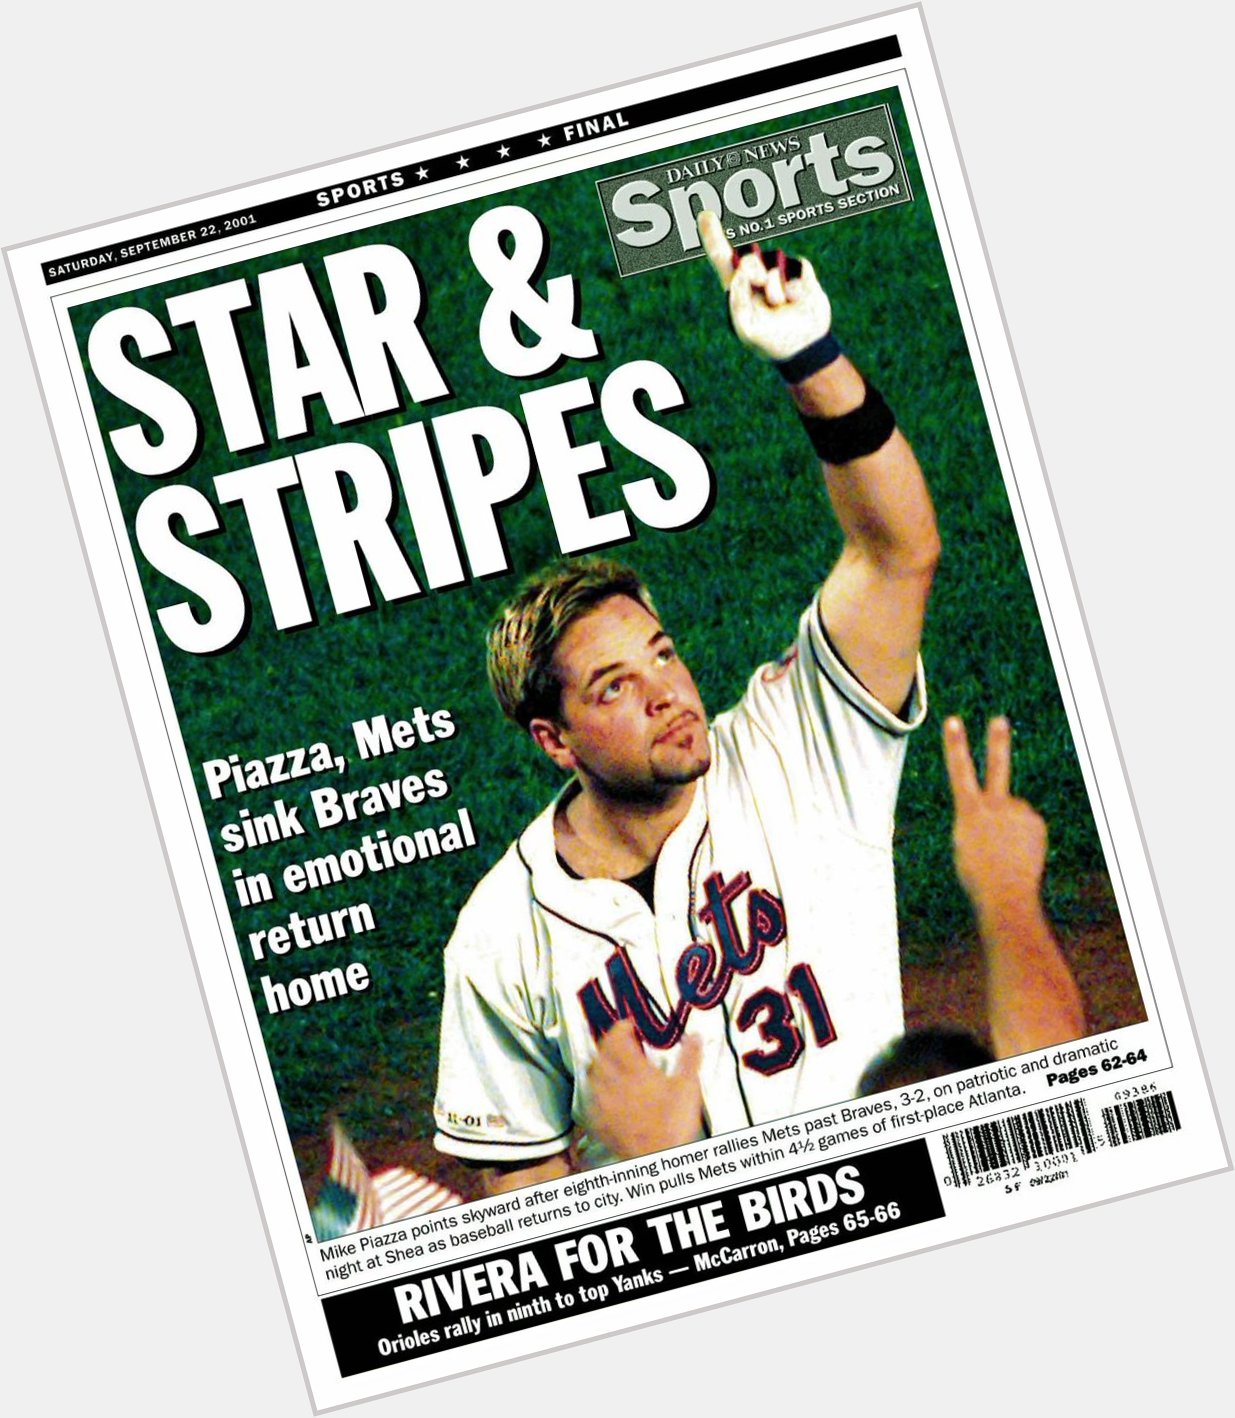 Happy Birthday to the greatest hitting catcher of all time, Mike Piazza. He turns 54 today unreal   